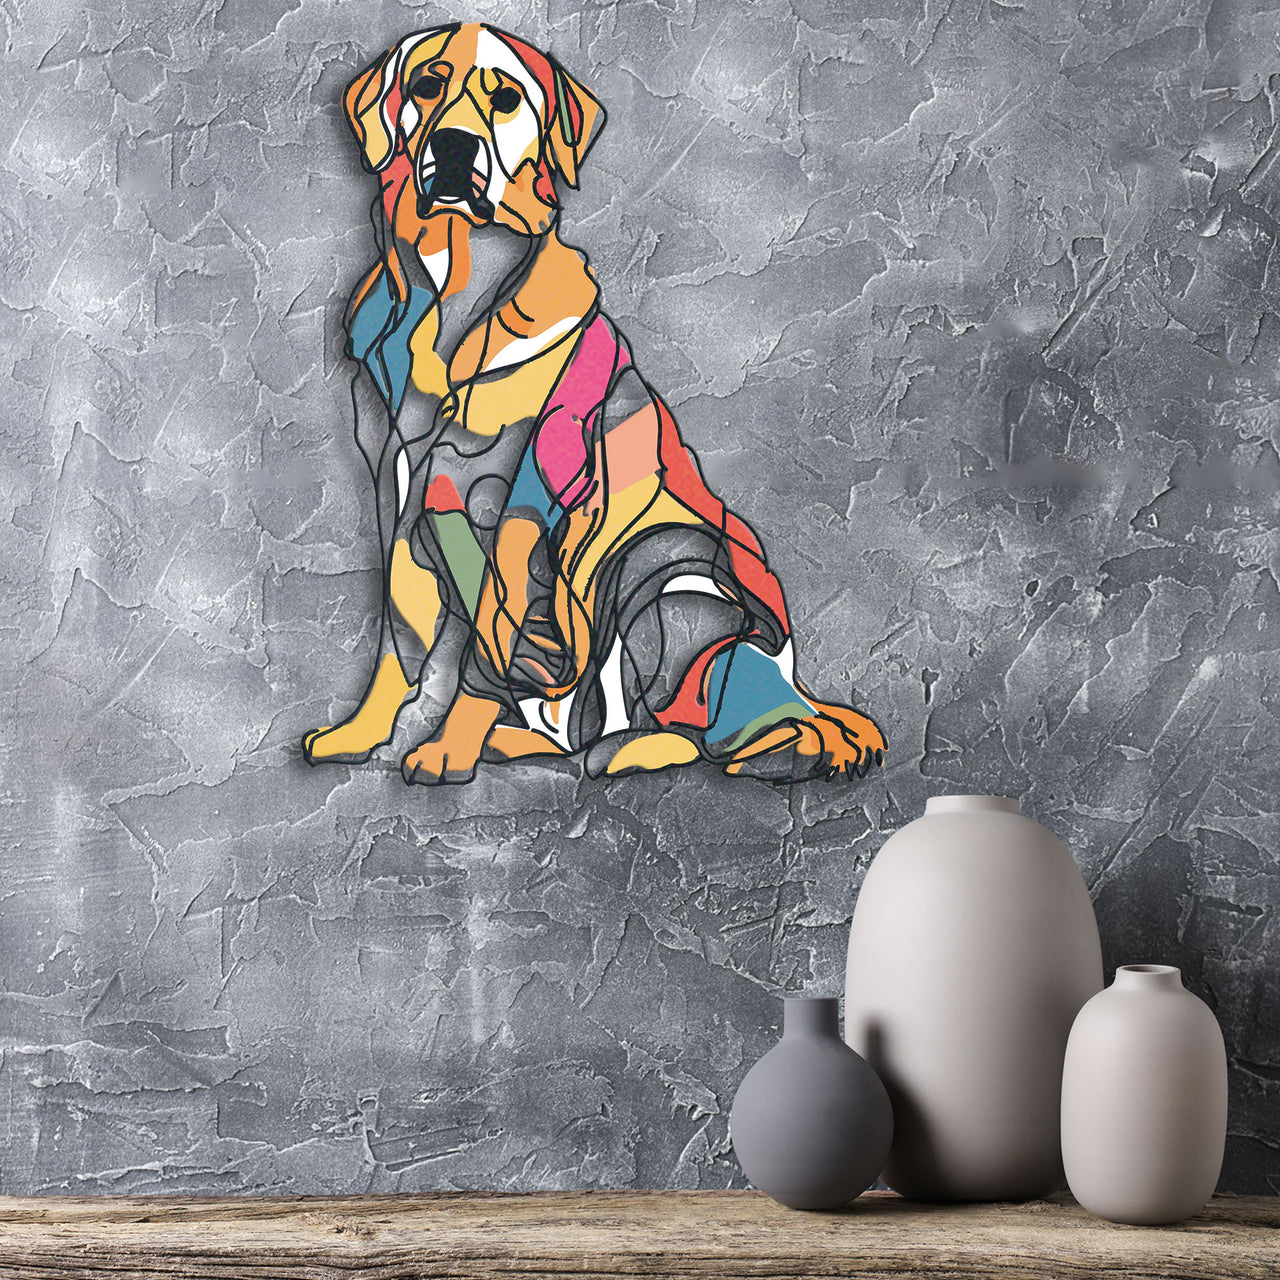 Abstract Golden Retriever Metal Wall Art, Whimsical Home Decor for Dog Lovers, Housewarming Gift